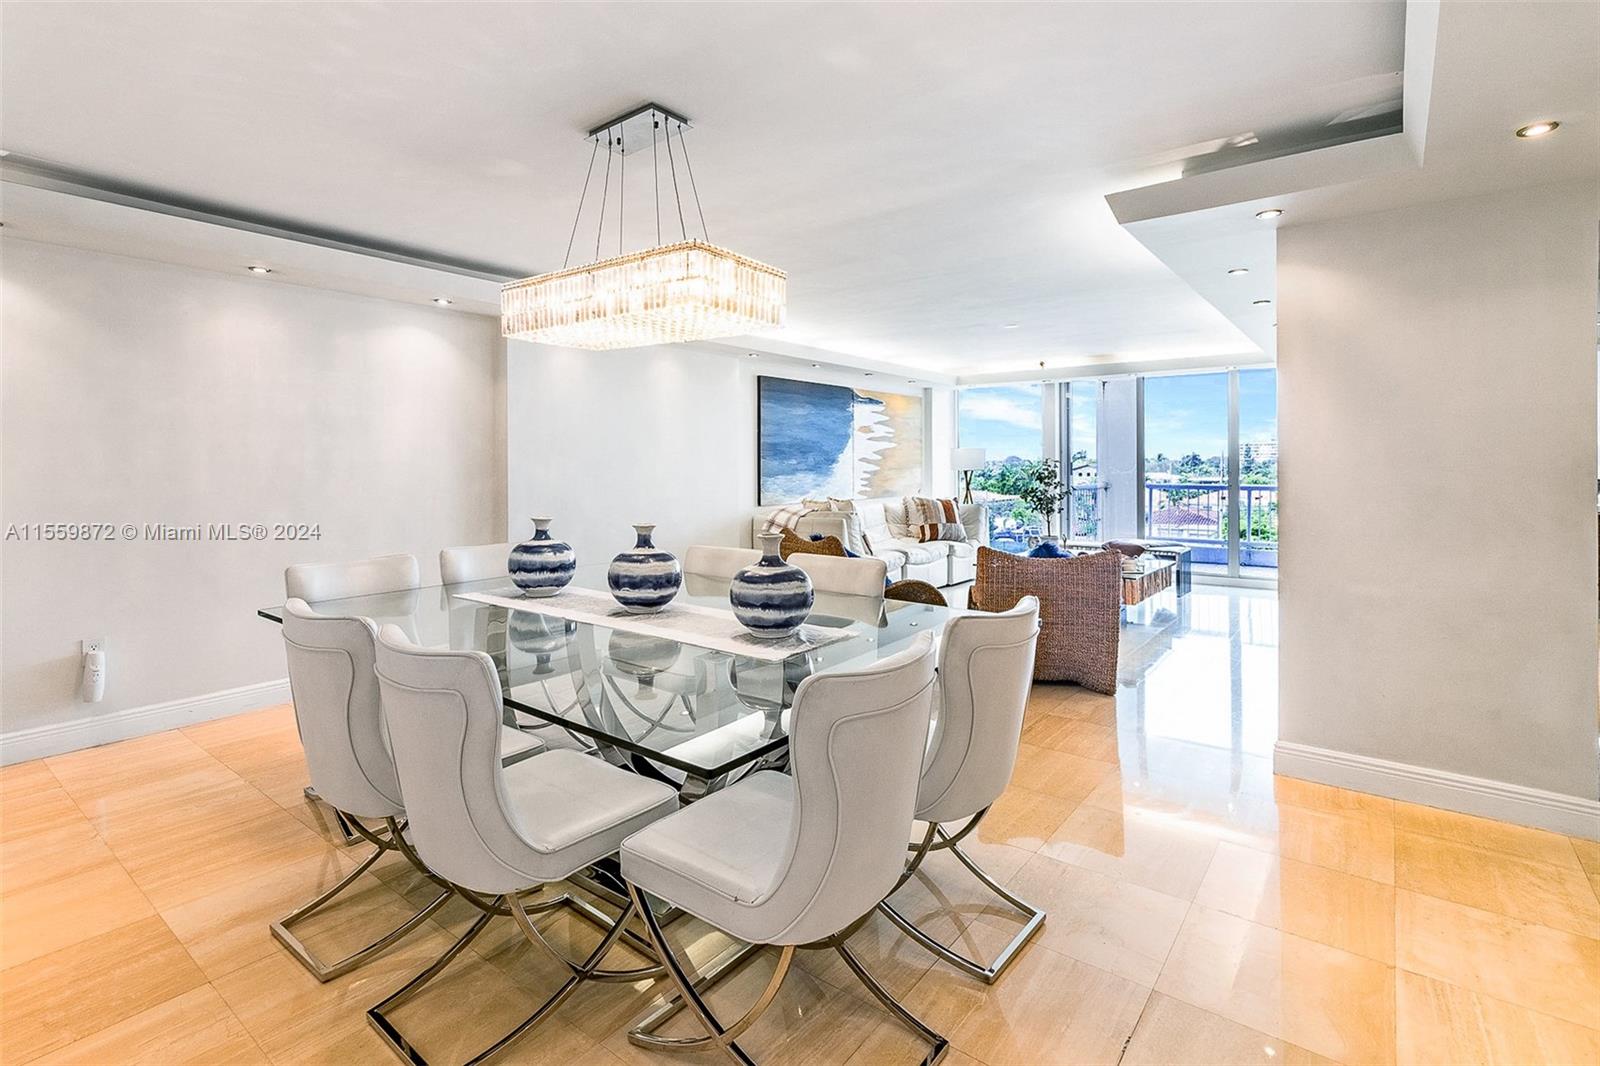 Welcome to this exquisite 3 Bed, 2.5-bath fully renovated apt in prime Surfside Location. This smartly designed residence boasts a sleek, modern kitchen equipped w/ top-of-the-line Thermador appliances, double sink, double oven & stylish Snaidero kitchen cabinets. The apt. features marble flrs throughout & flr-to-ceiling windows, offering an abundance of natural light and a sense of openness. This apt. also includes a washer/dryer & 2 garage spots.  Building Amenities: heated pool, gym, lounge/party room, Shabbat elevator, and a full-time doorman. 

Located just 1-2 blocks from the vibrant Surfside Shopping District, renowned restaurants, Bal Harbour Shops, places of worship & the Surfside Community Center. Don't miss the opportunity to make this stunning apartment your new home.